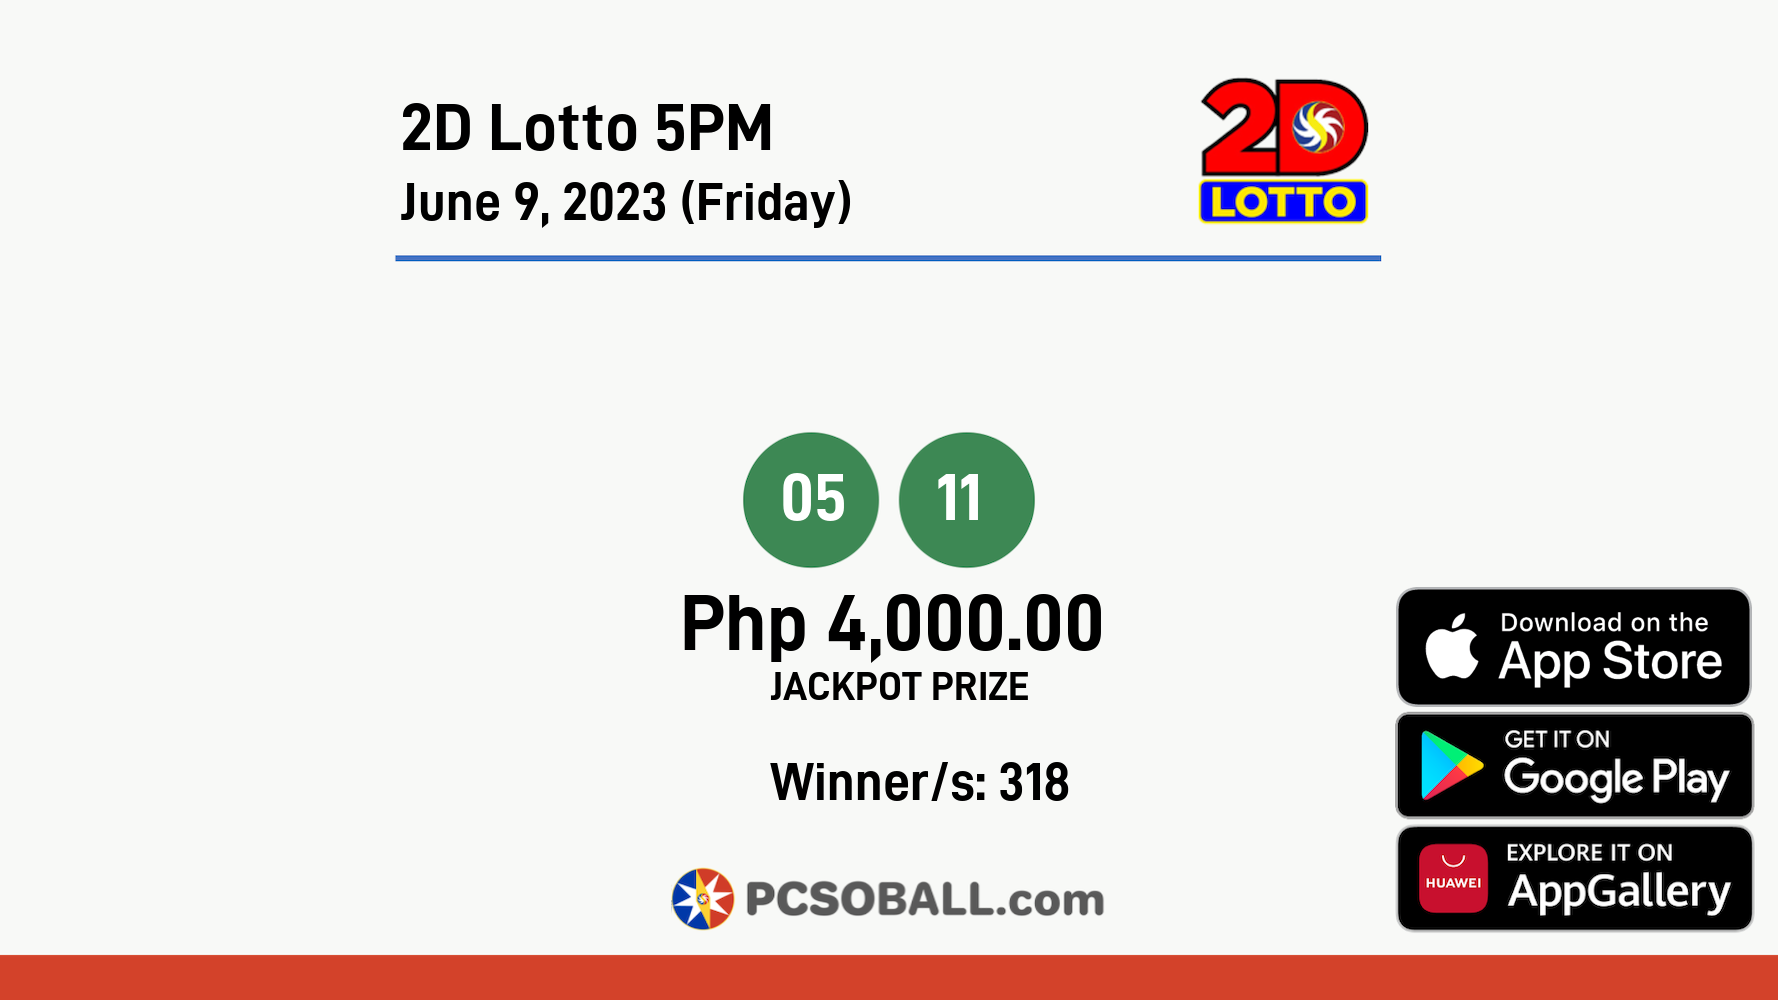 2D Lotto 5PM June 9, 2023 (Friday) Result